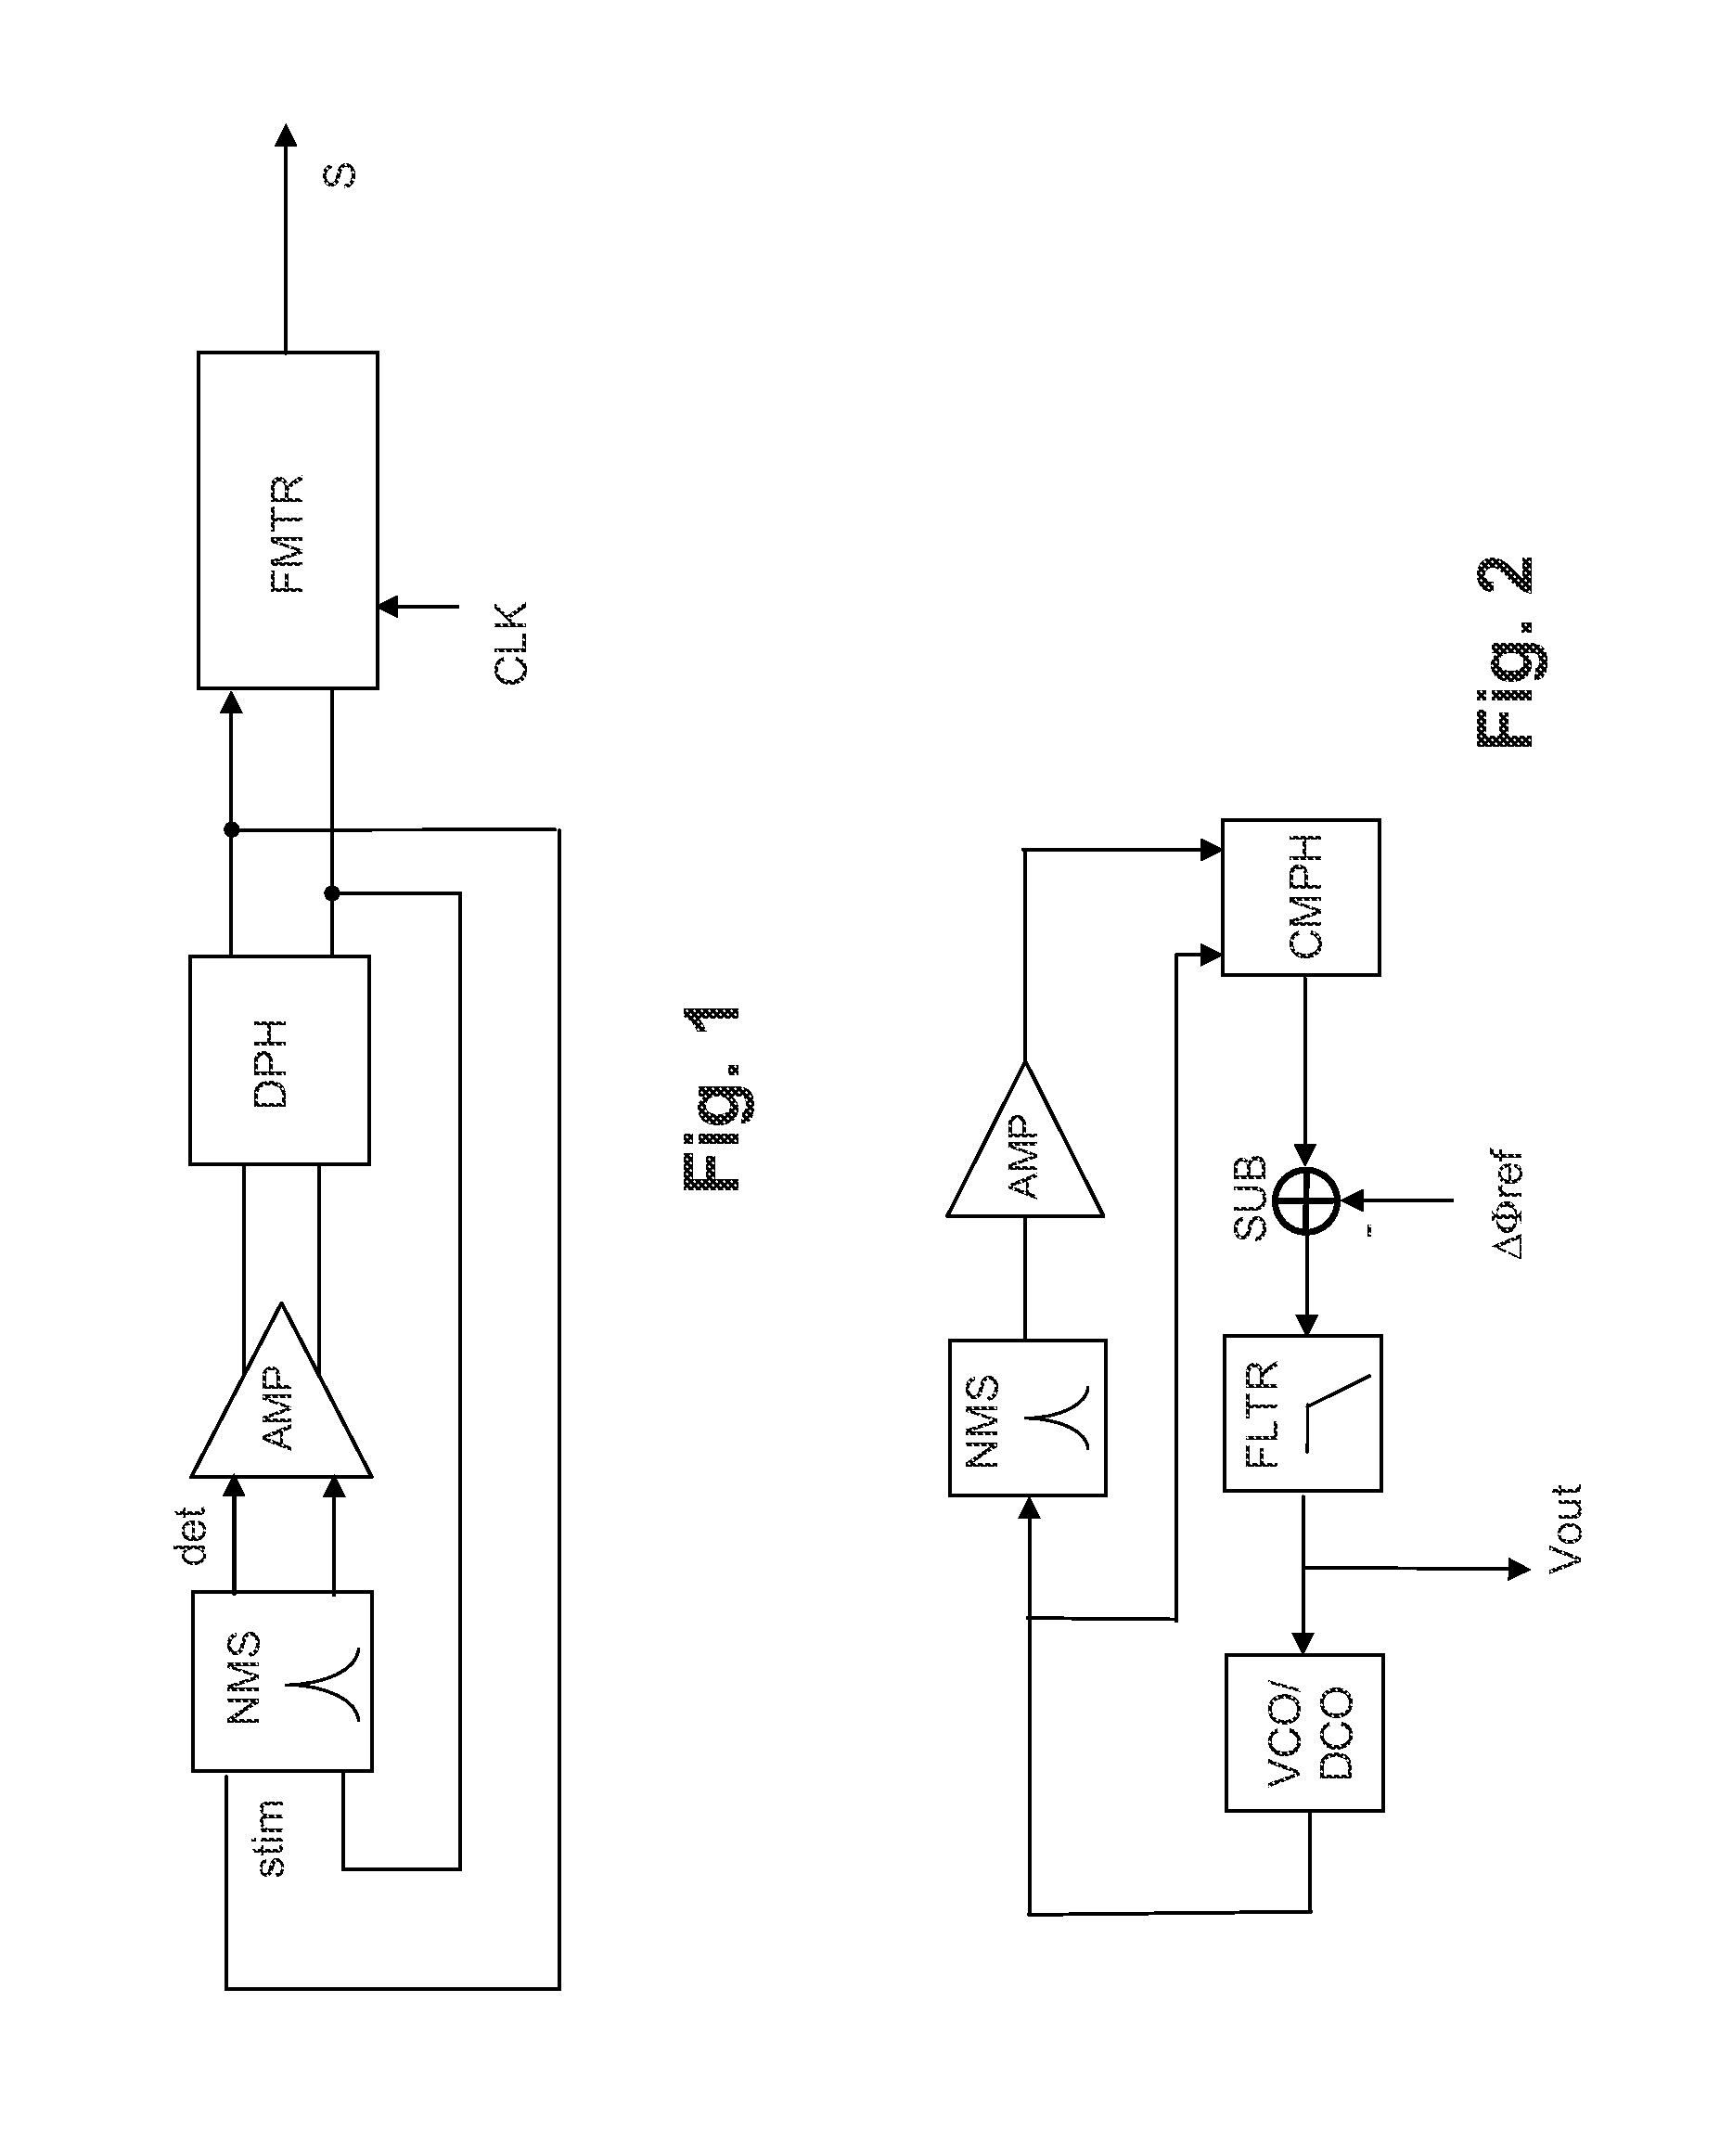 Circuit for measuring the resonant frequency of nanoresonators